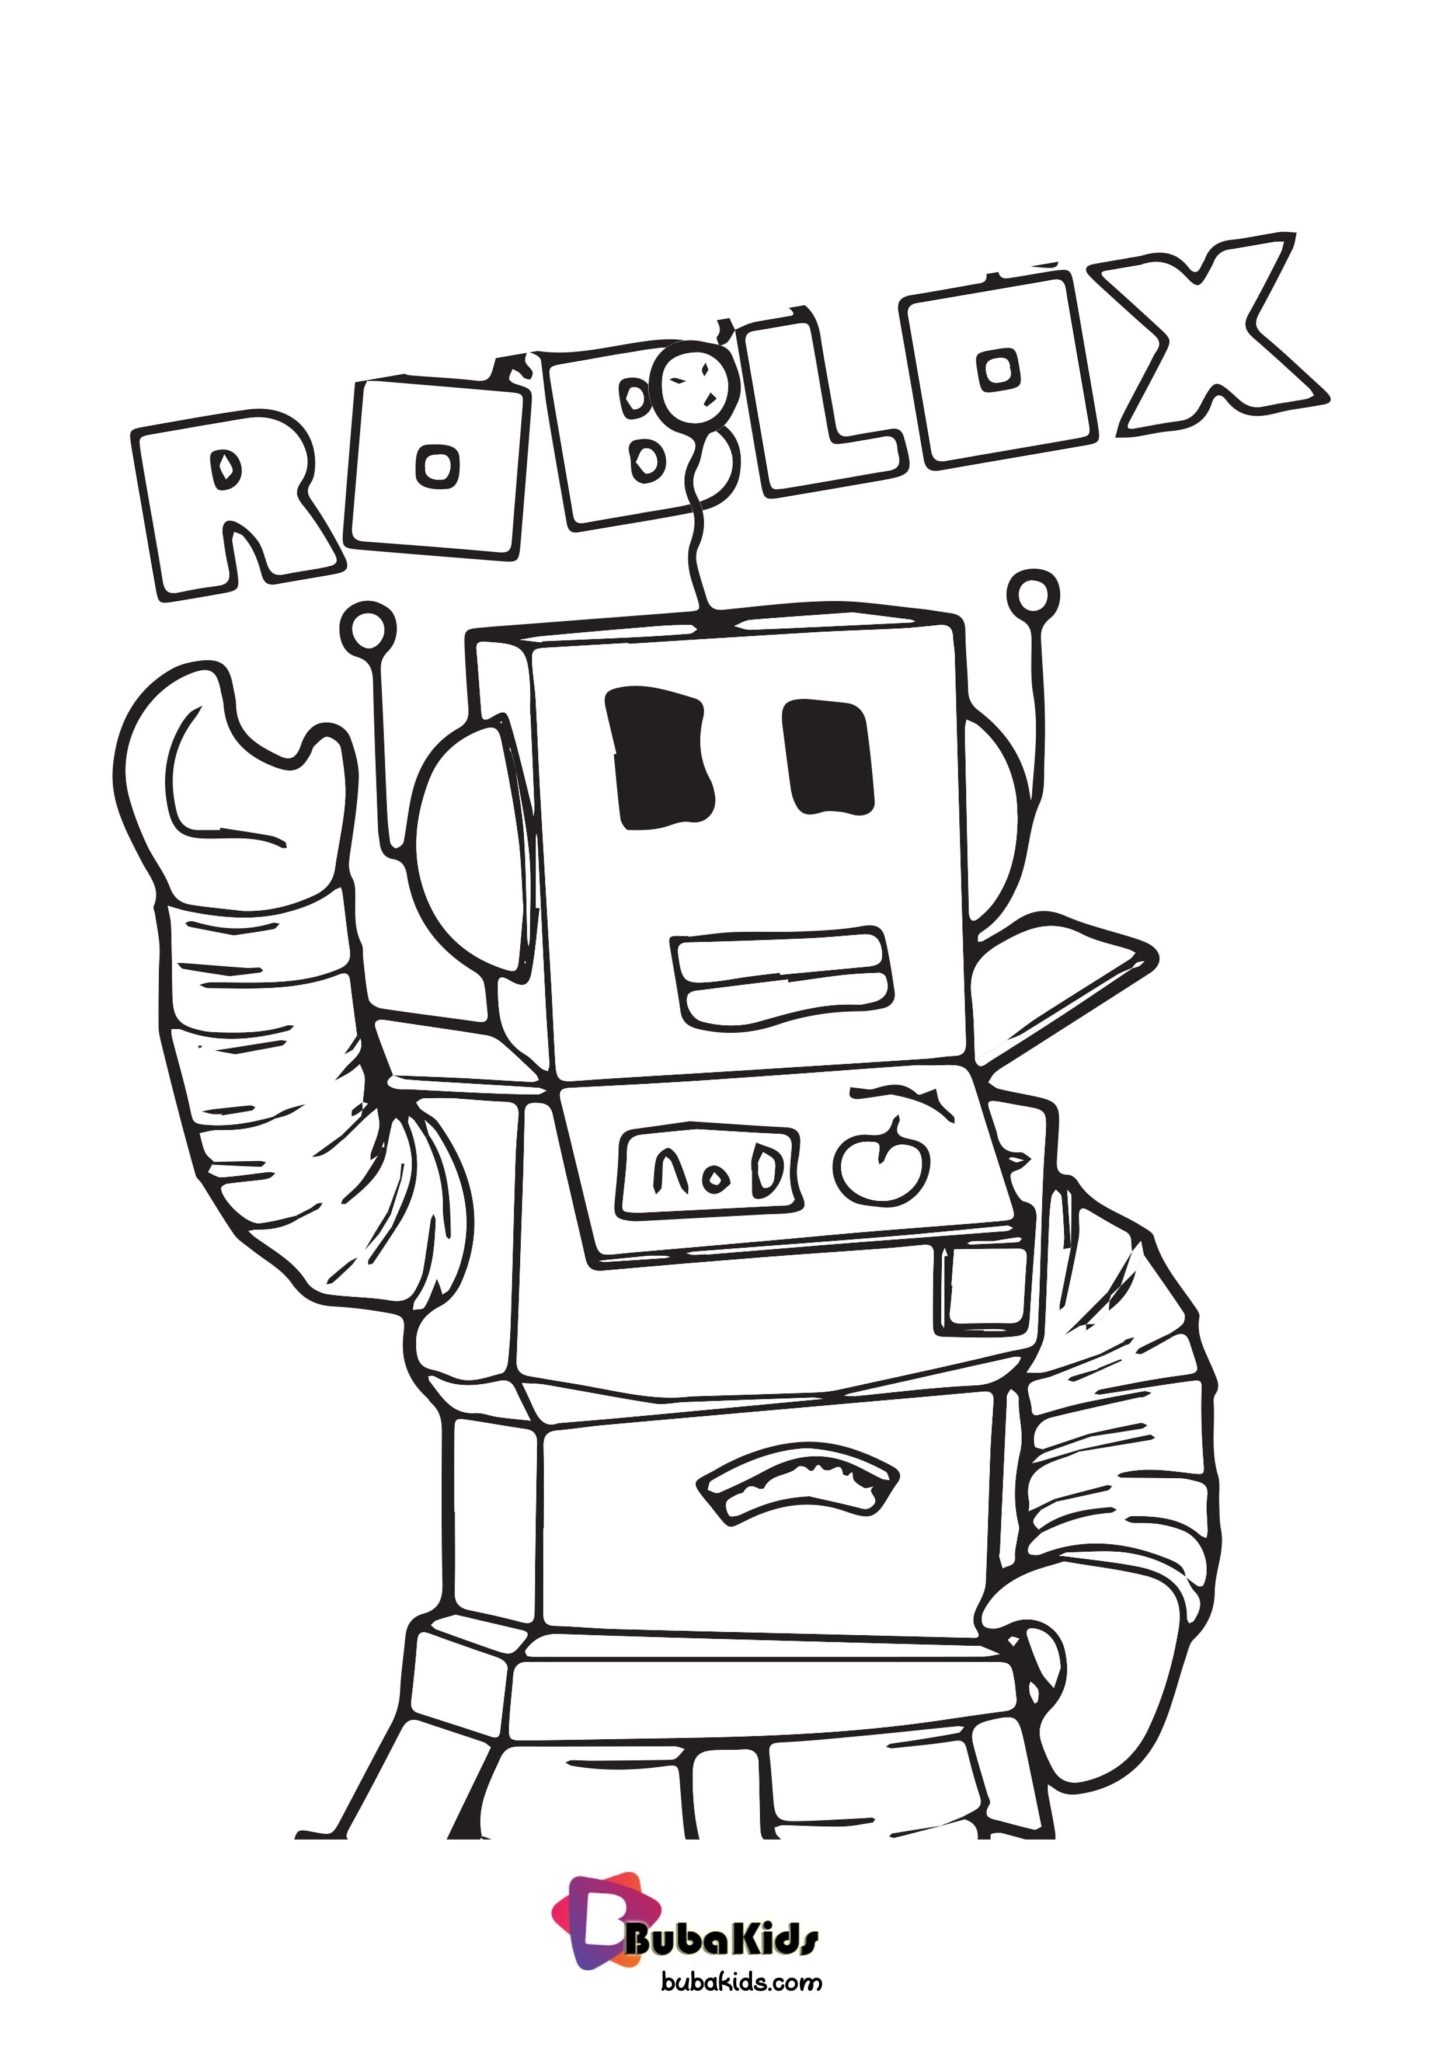 Roblox Coloring Pages Printable Customize And Print